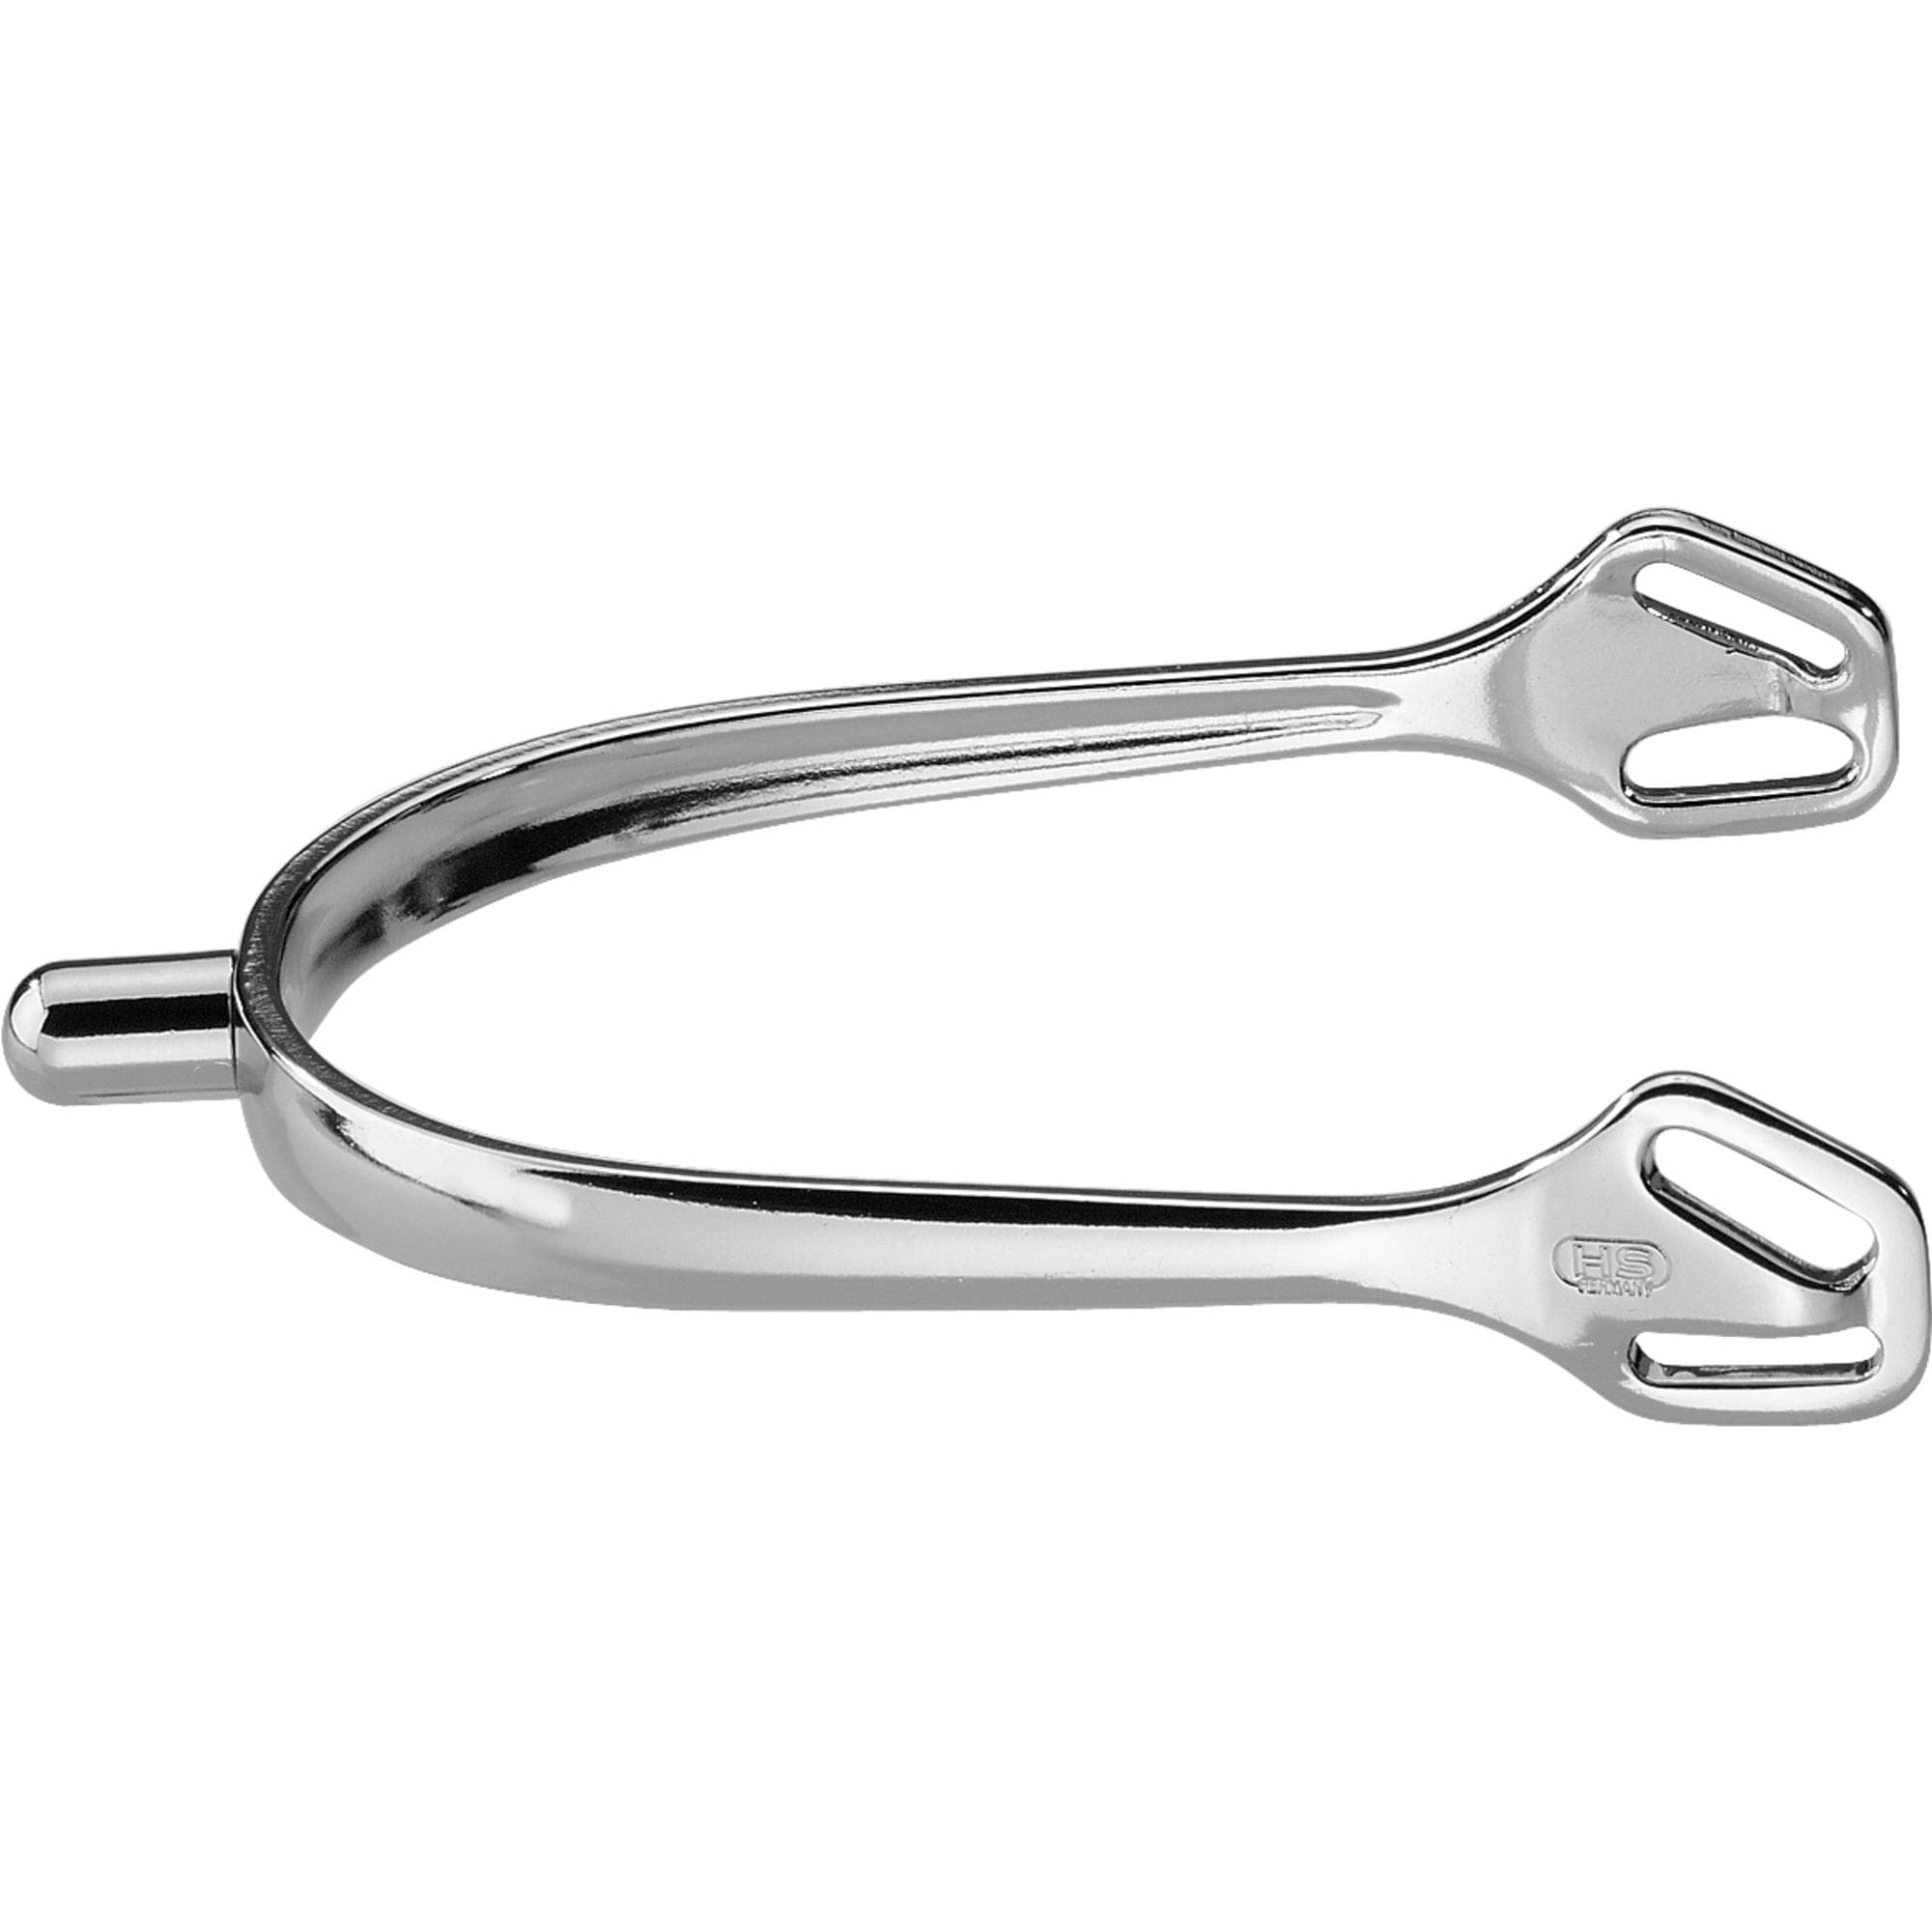 Herm Sprenger Ultra Fit English Spurs - Rounded